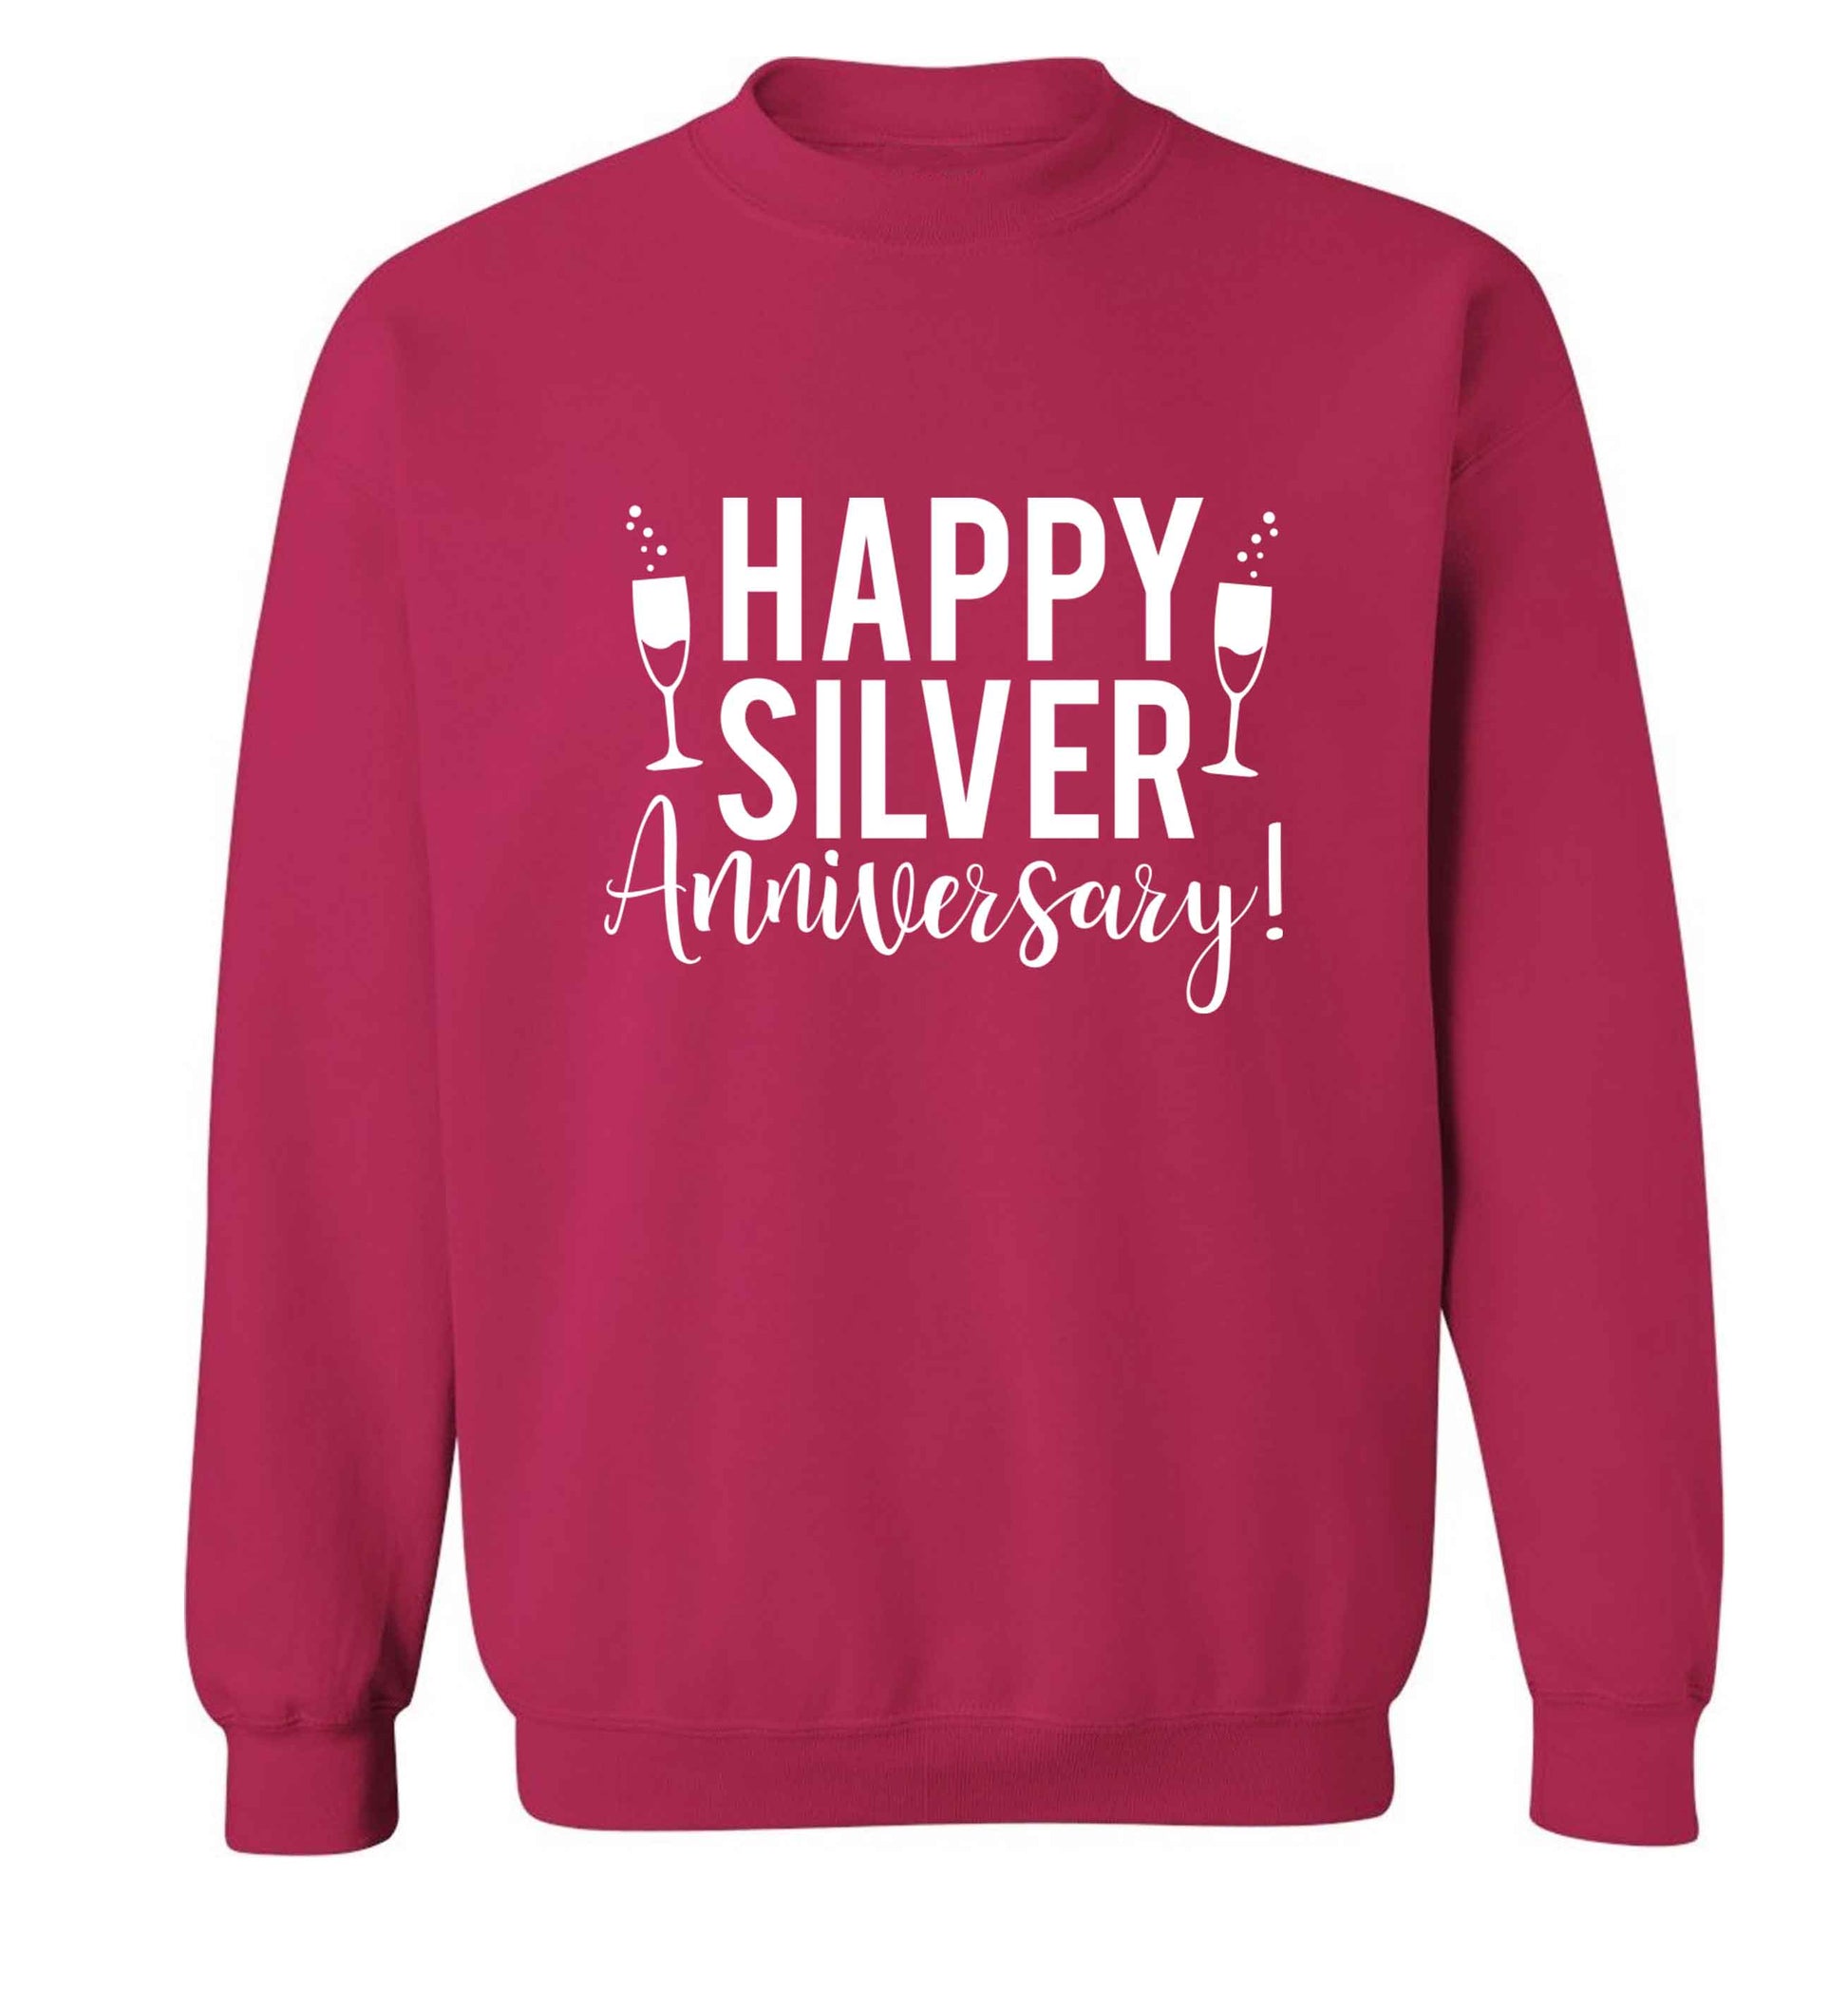 Happy silver anniversary! adult's unisex pink sweater 2XL